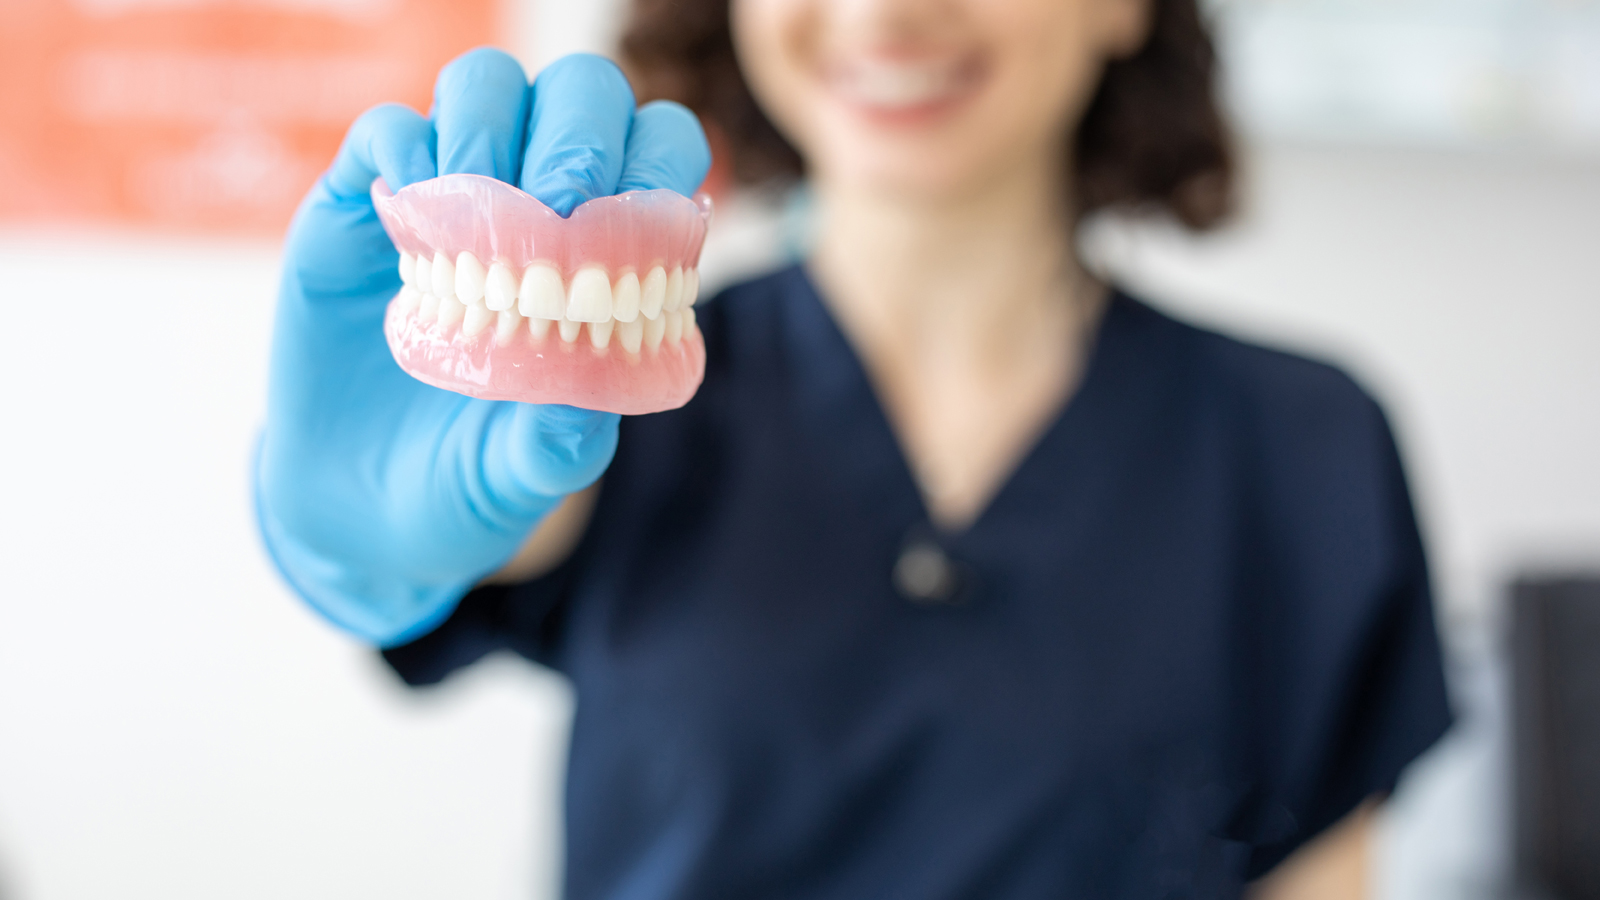 Dental hygienist smiling while holding and up close shot of dentures.